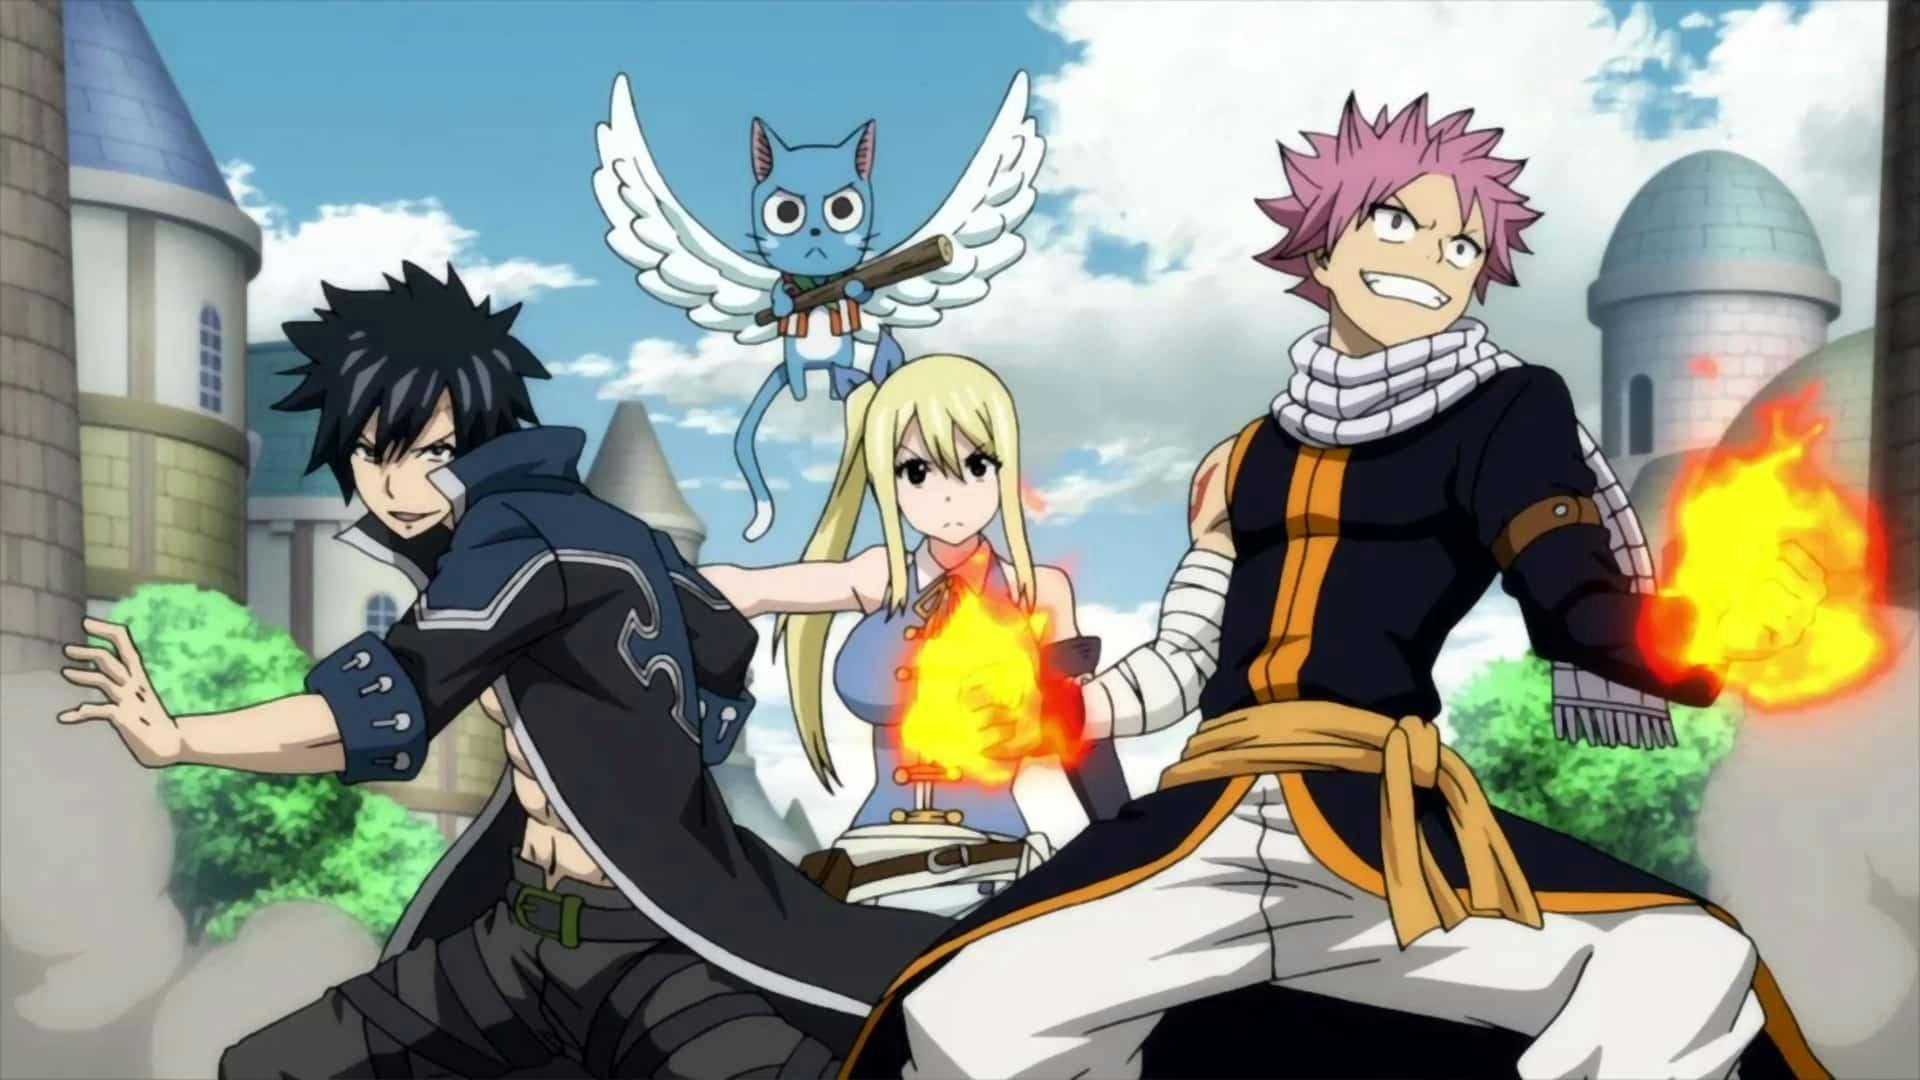 Fairy Tail background image